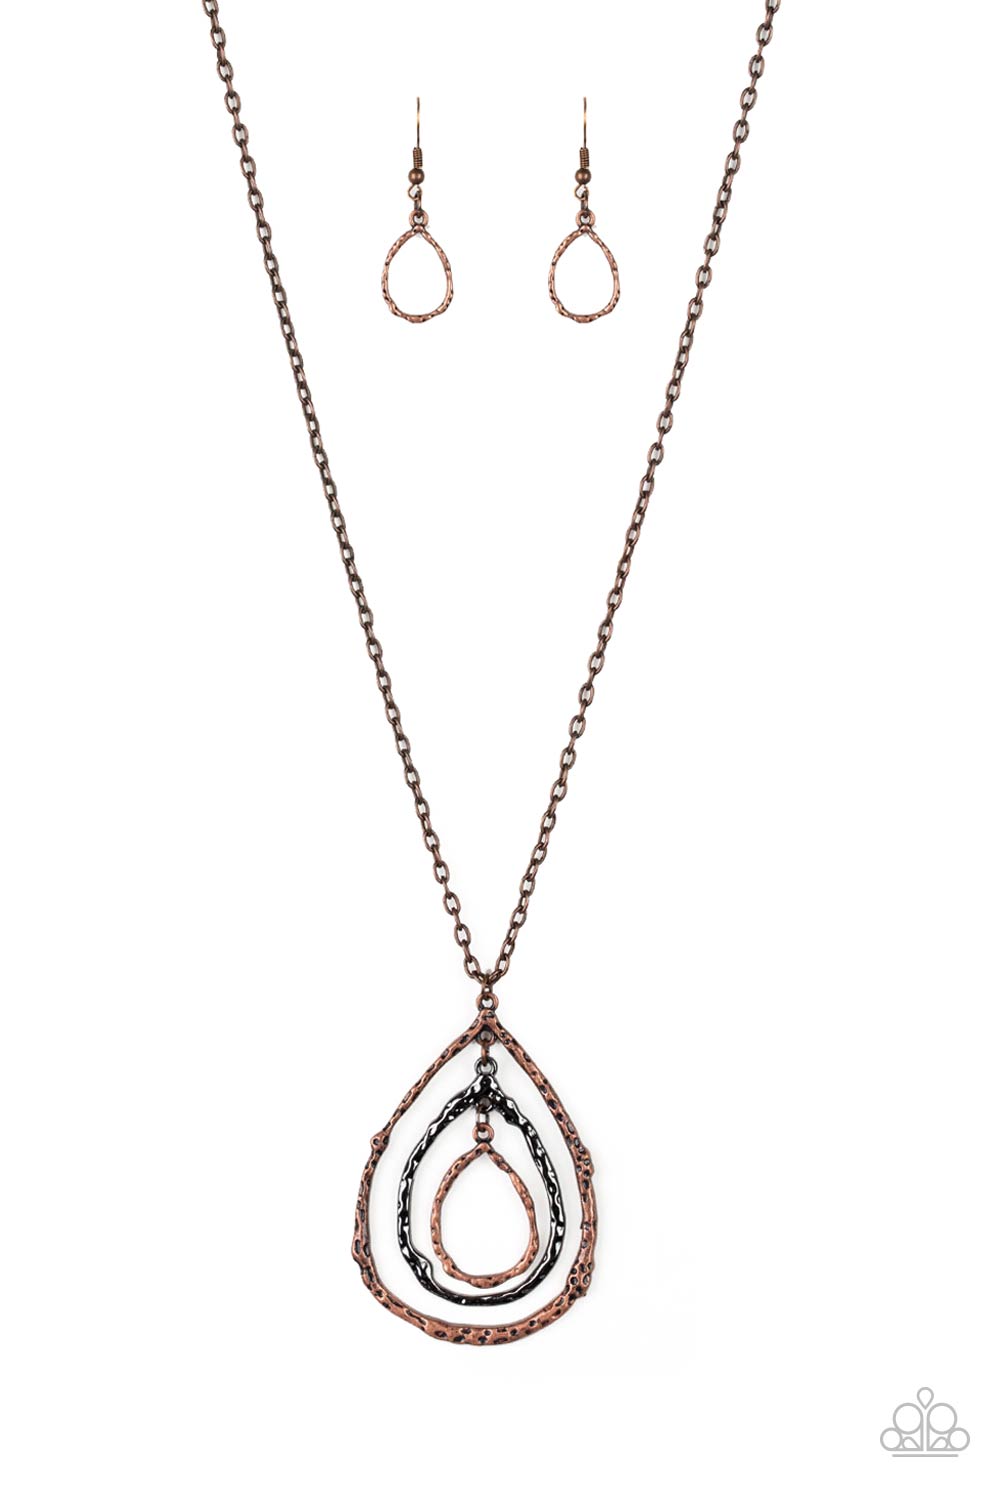 Going For Grit - Copper (Mixed Metals) Necklace